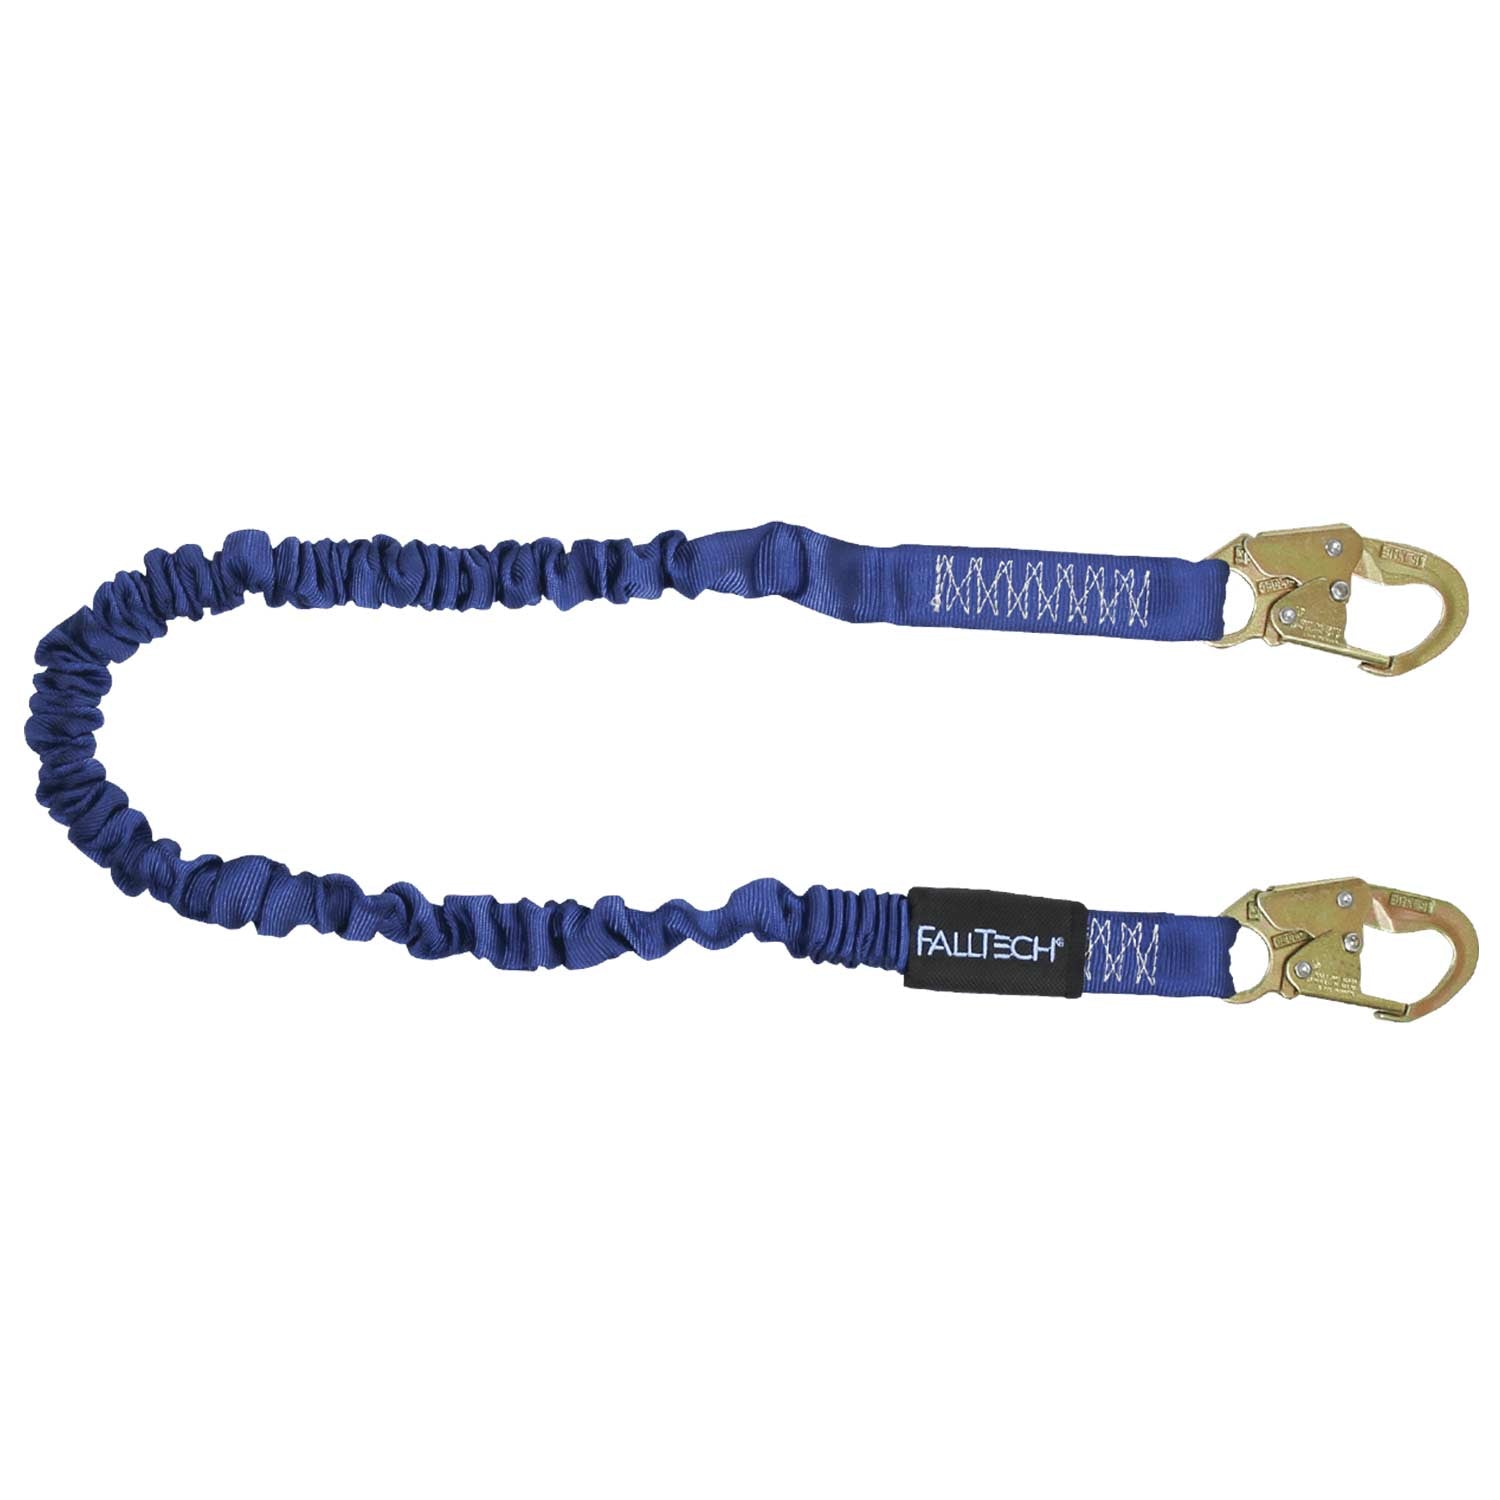 BUNGEE CORD WITH HOOKS (1'') FLAT HEAVY DUTY ADJUSTABLE MAXX BUNGEE STRAP  WITH CARABINER